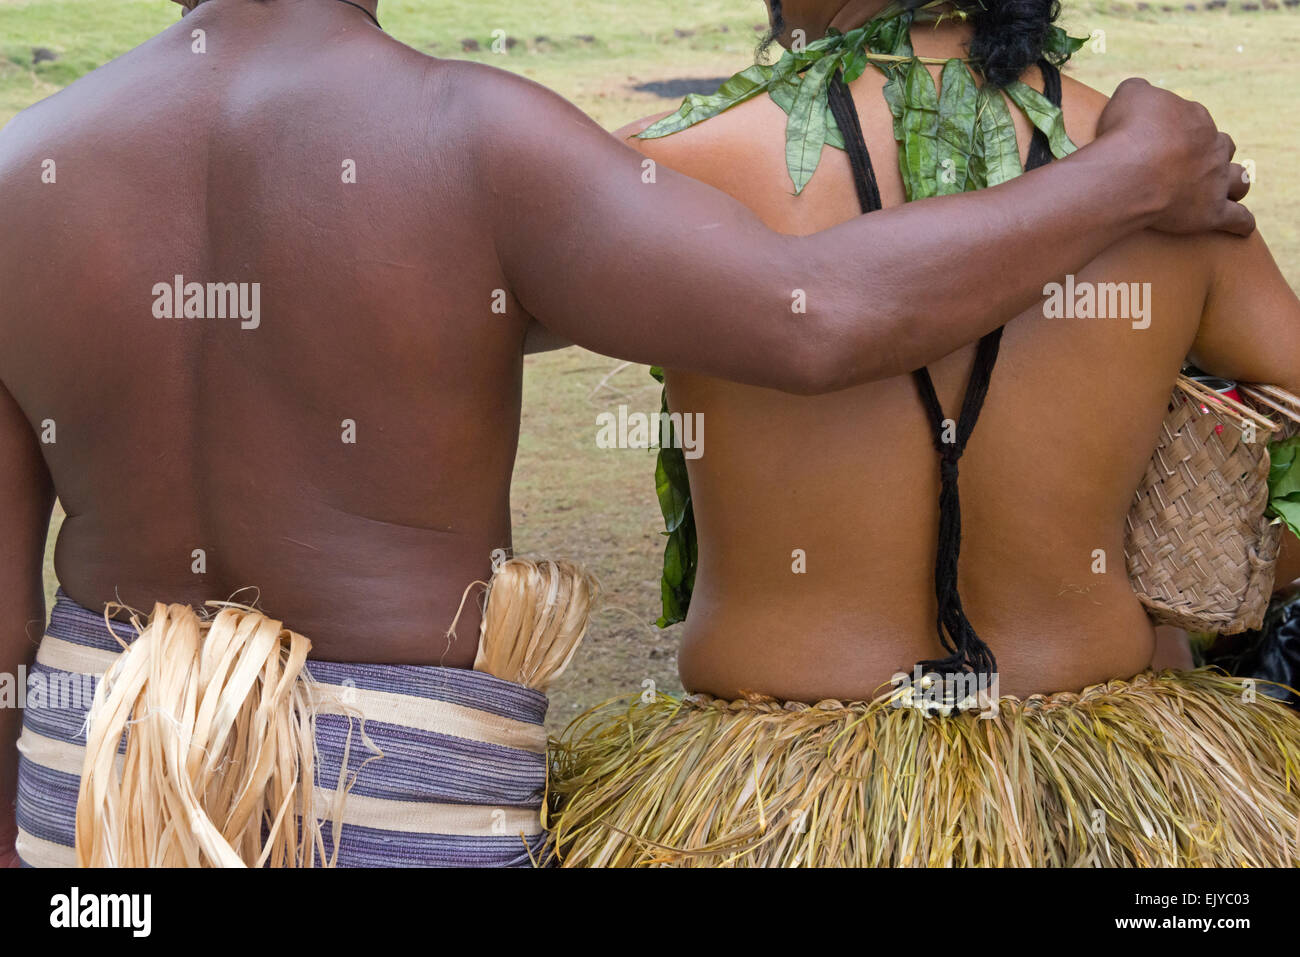 Yapese man and woman in traditional clothing at Yap Day Festival, Yap Island, Federated States of Micronesia Stock Photo